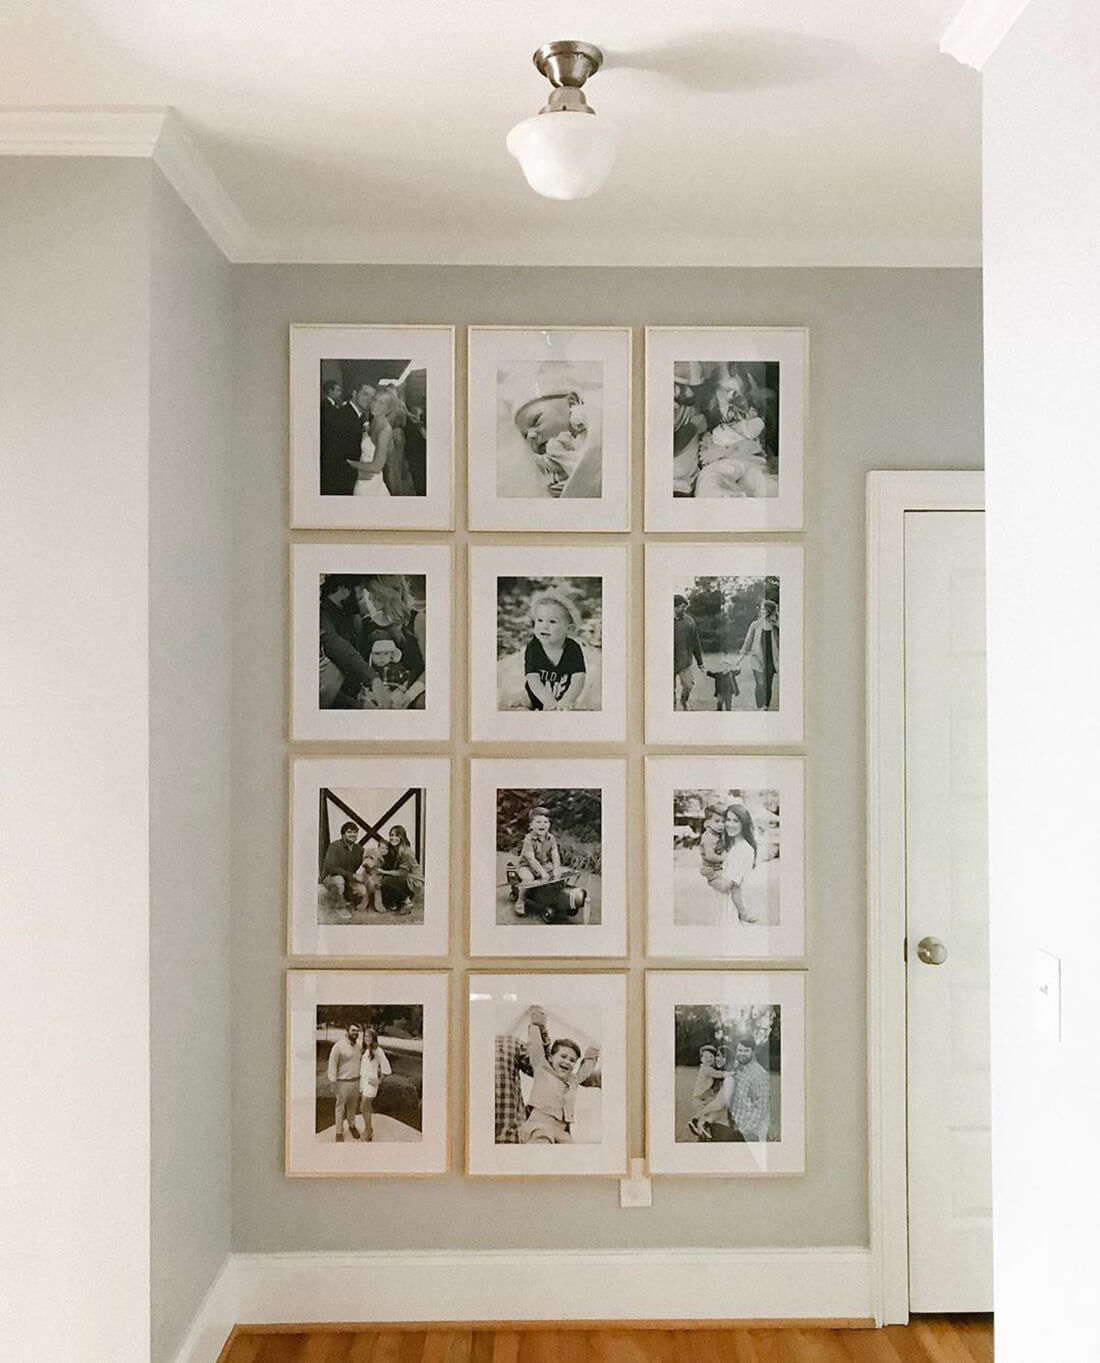 How to Create a Flawless Photo Gallery Wall in 5 Easy Steps • Little Gold Pixel #familyphotos #gallerywall #gallerywallideas

Photo © House of Blue Hues